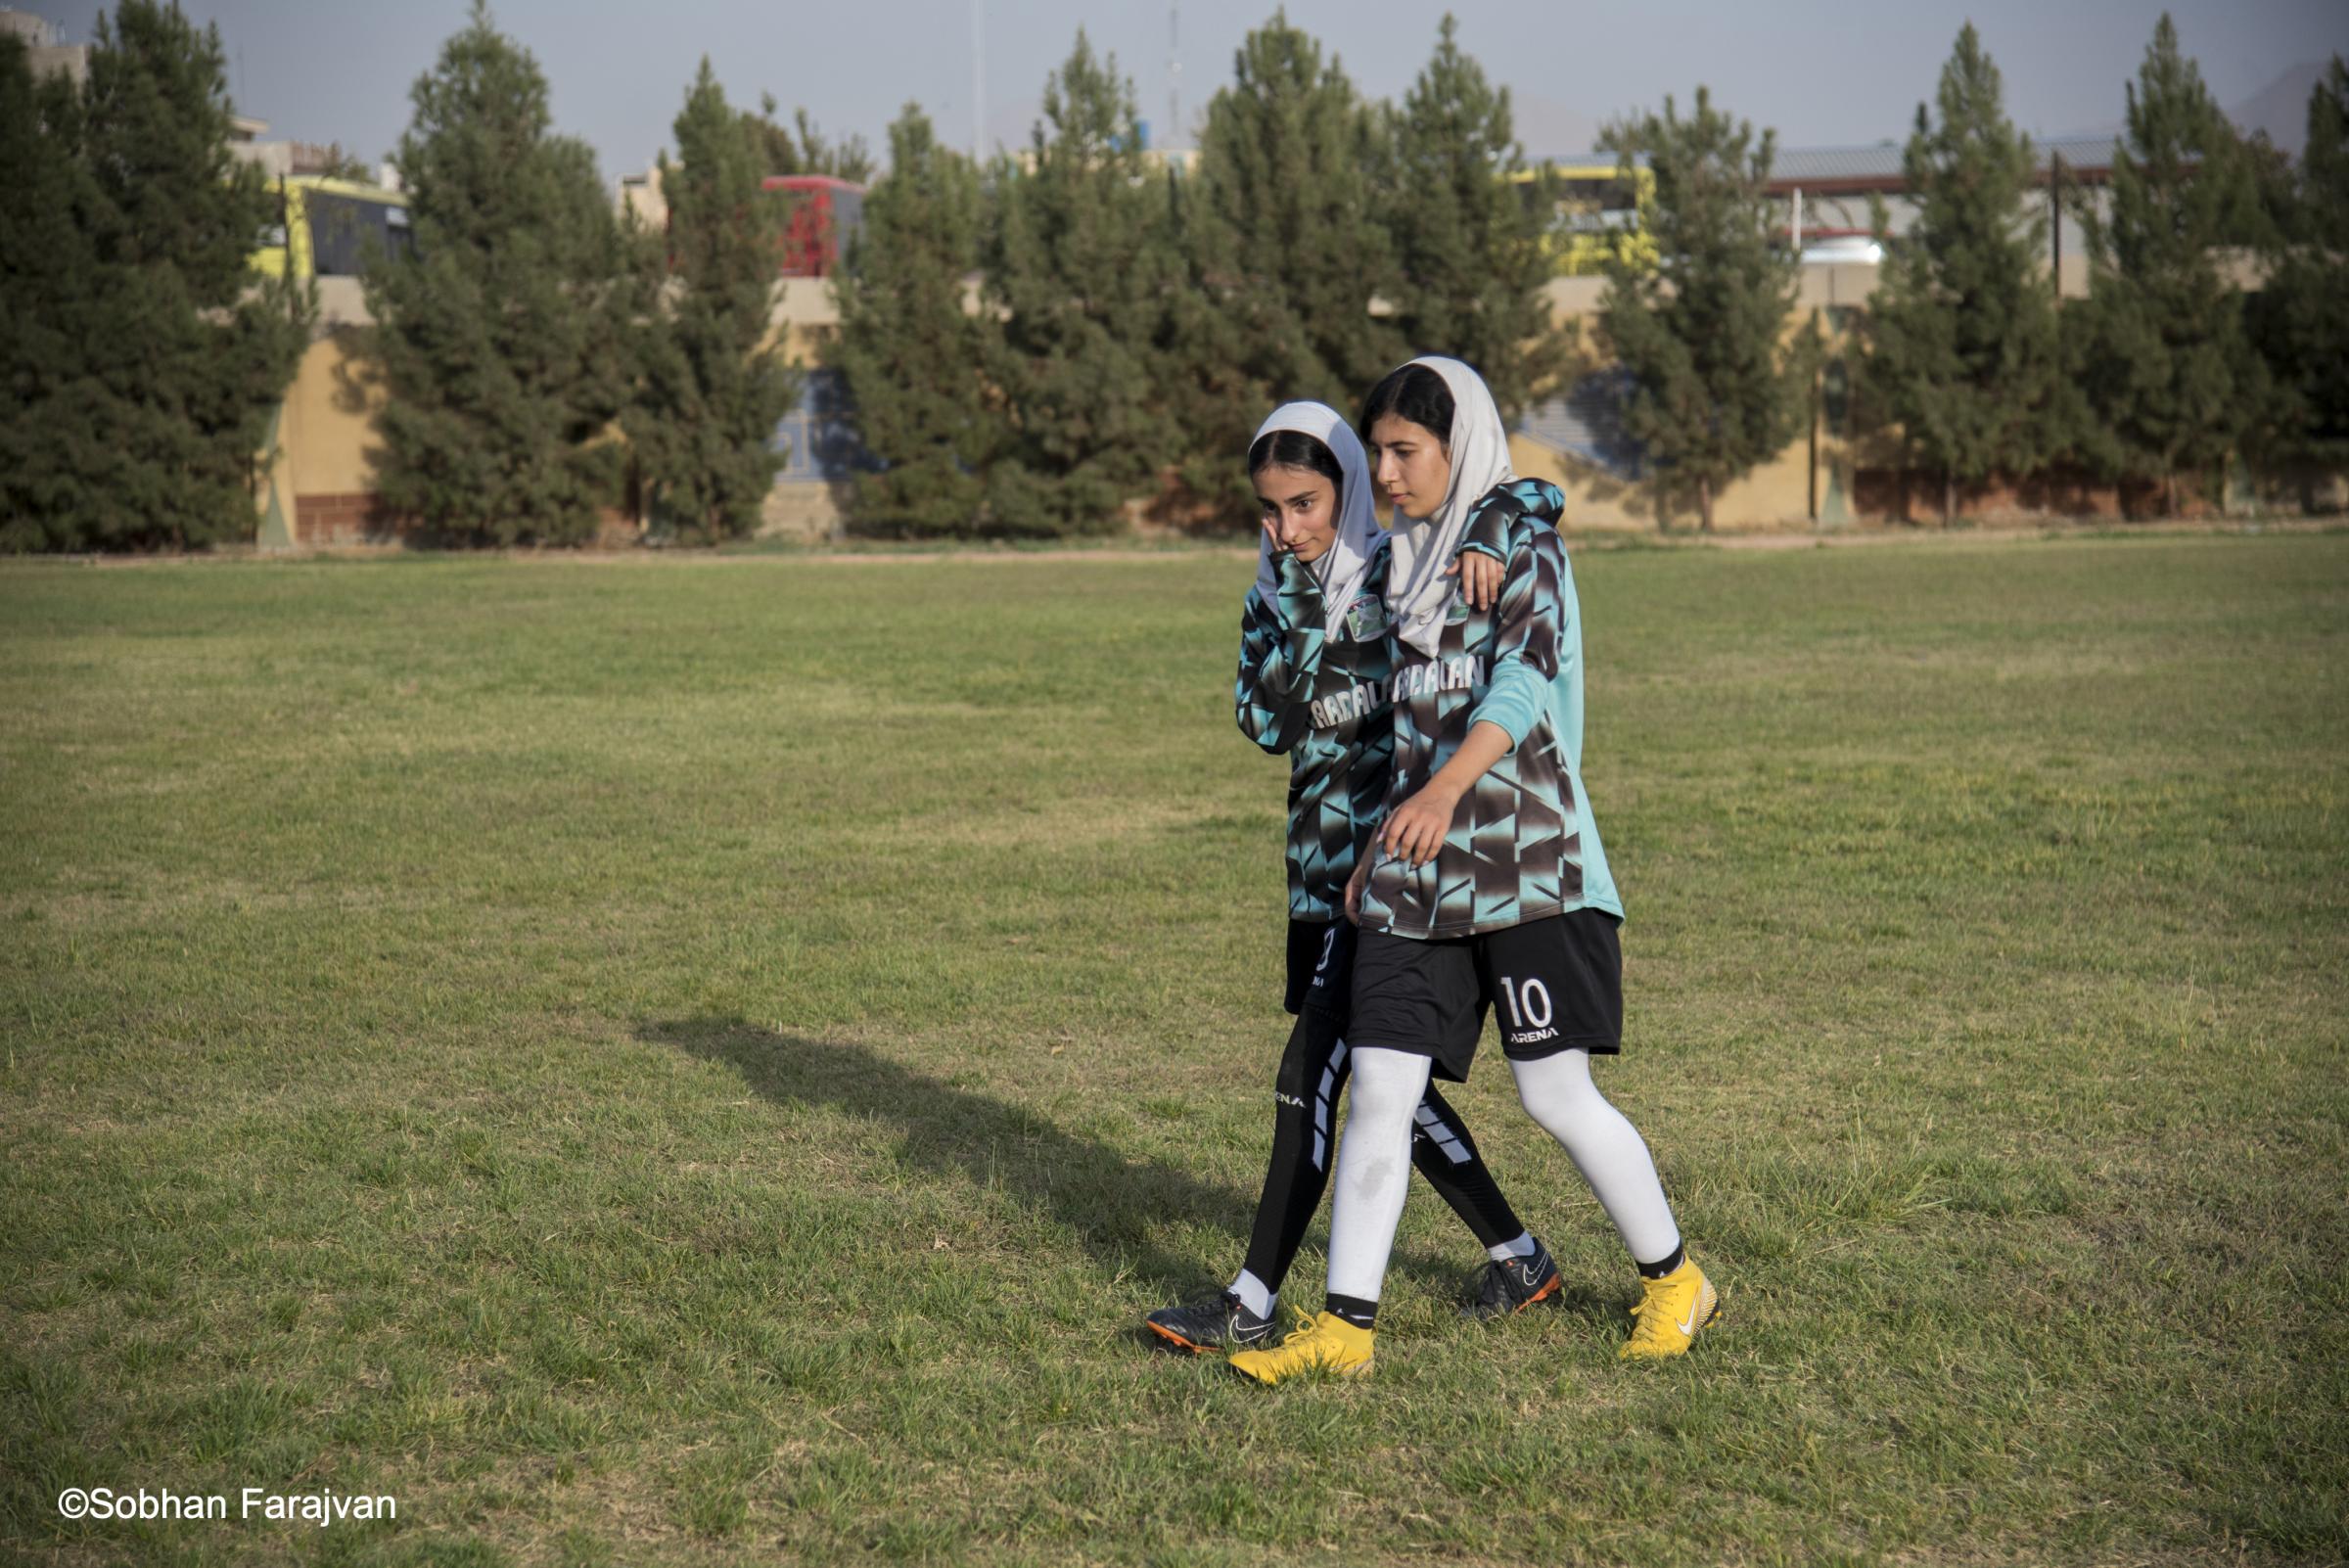 Iranian women's soccer academy (2022) - Two Iranian soccer players talk to each other during a...